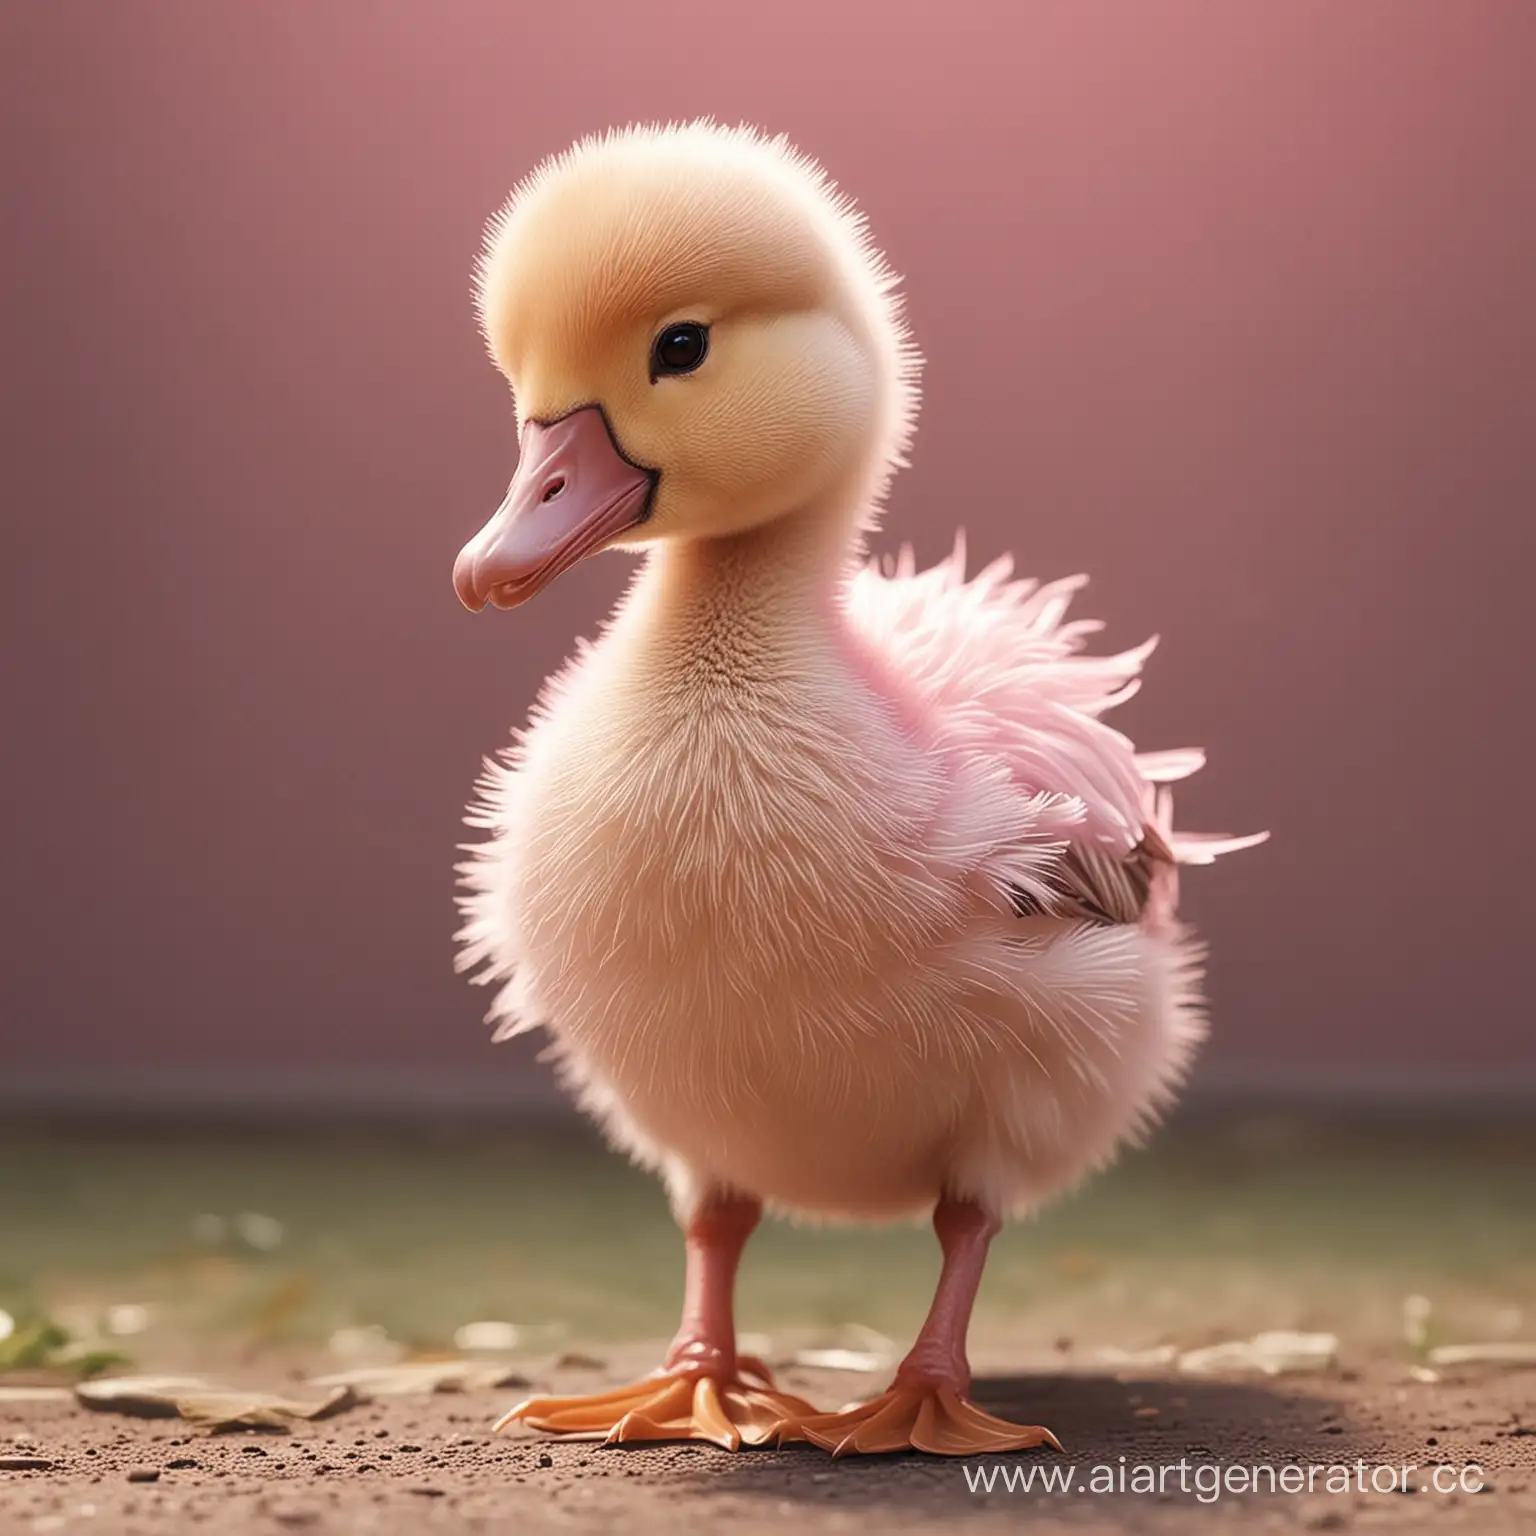 Cute-Animated-Pink-Gosling-in-a-Kindly-Scene